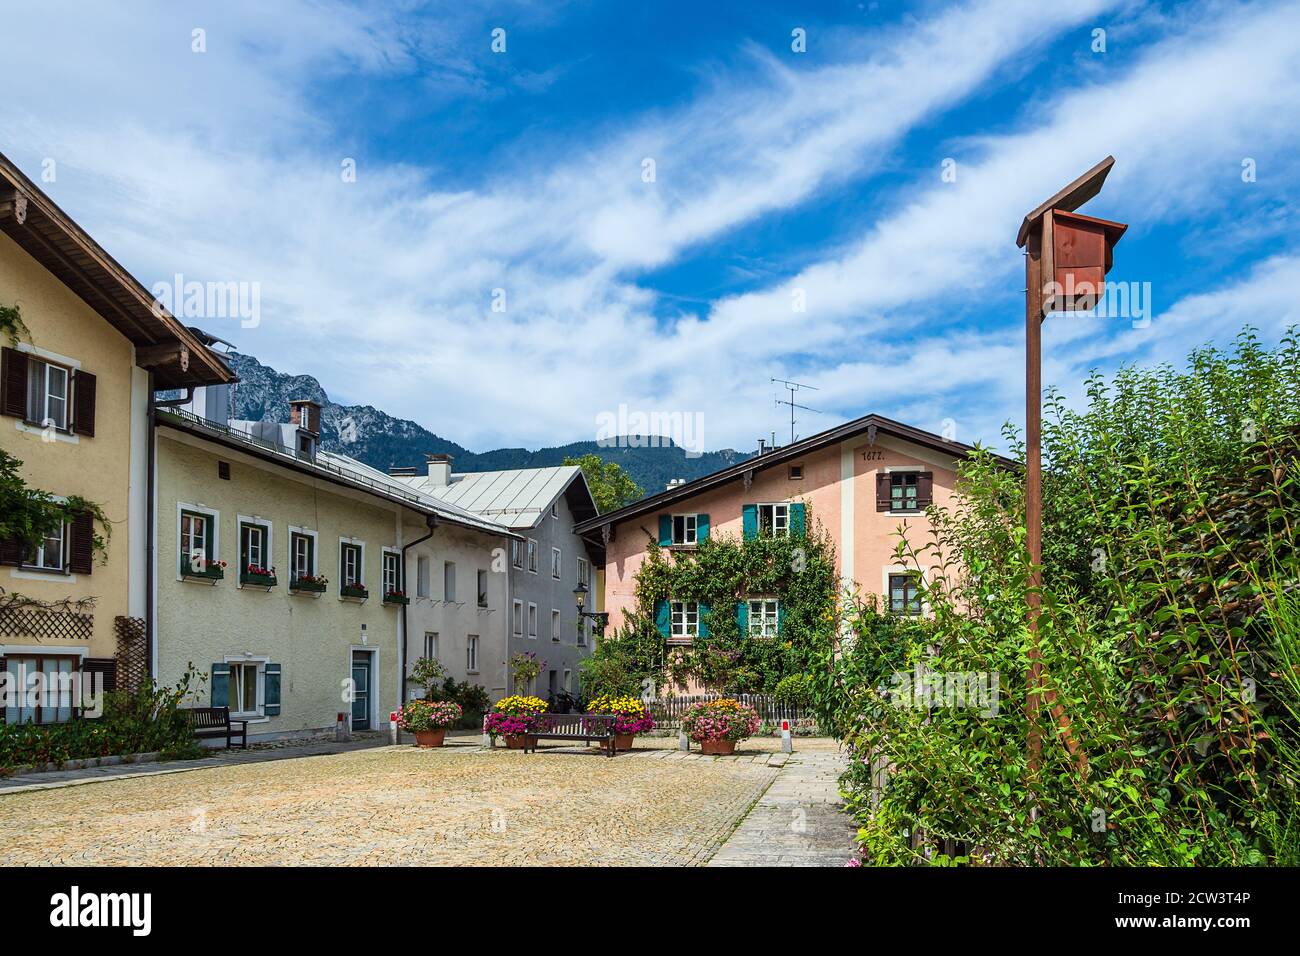 Buildings on the square Florianiplatz in Bad Reichenhall, Germany. Stock Photo